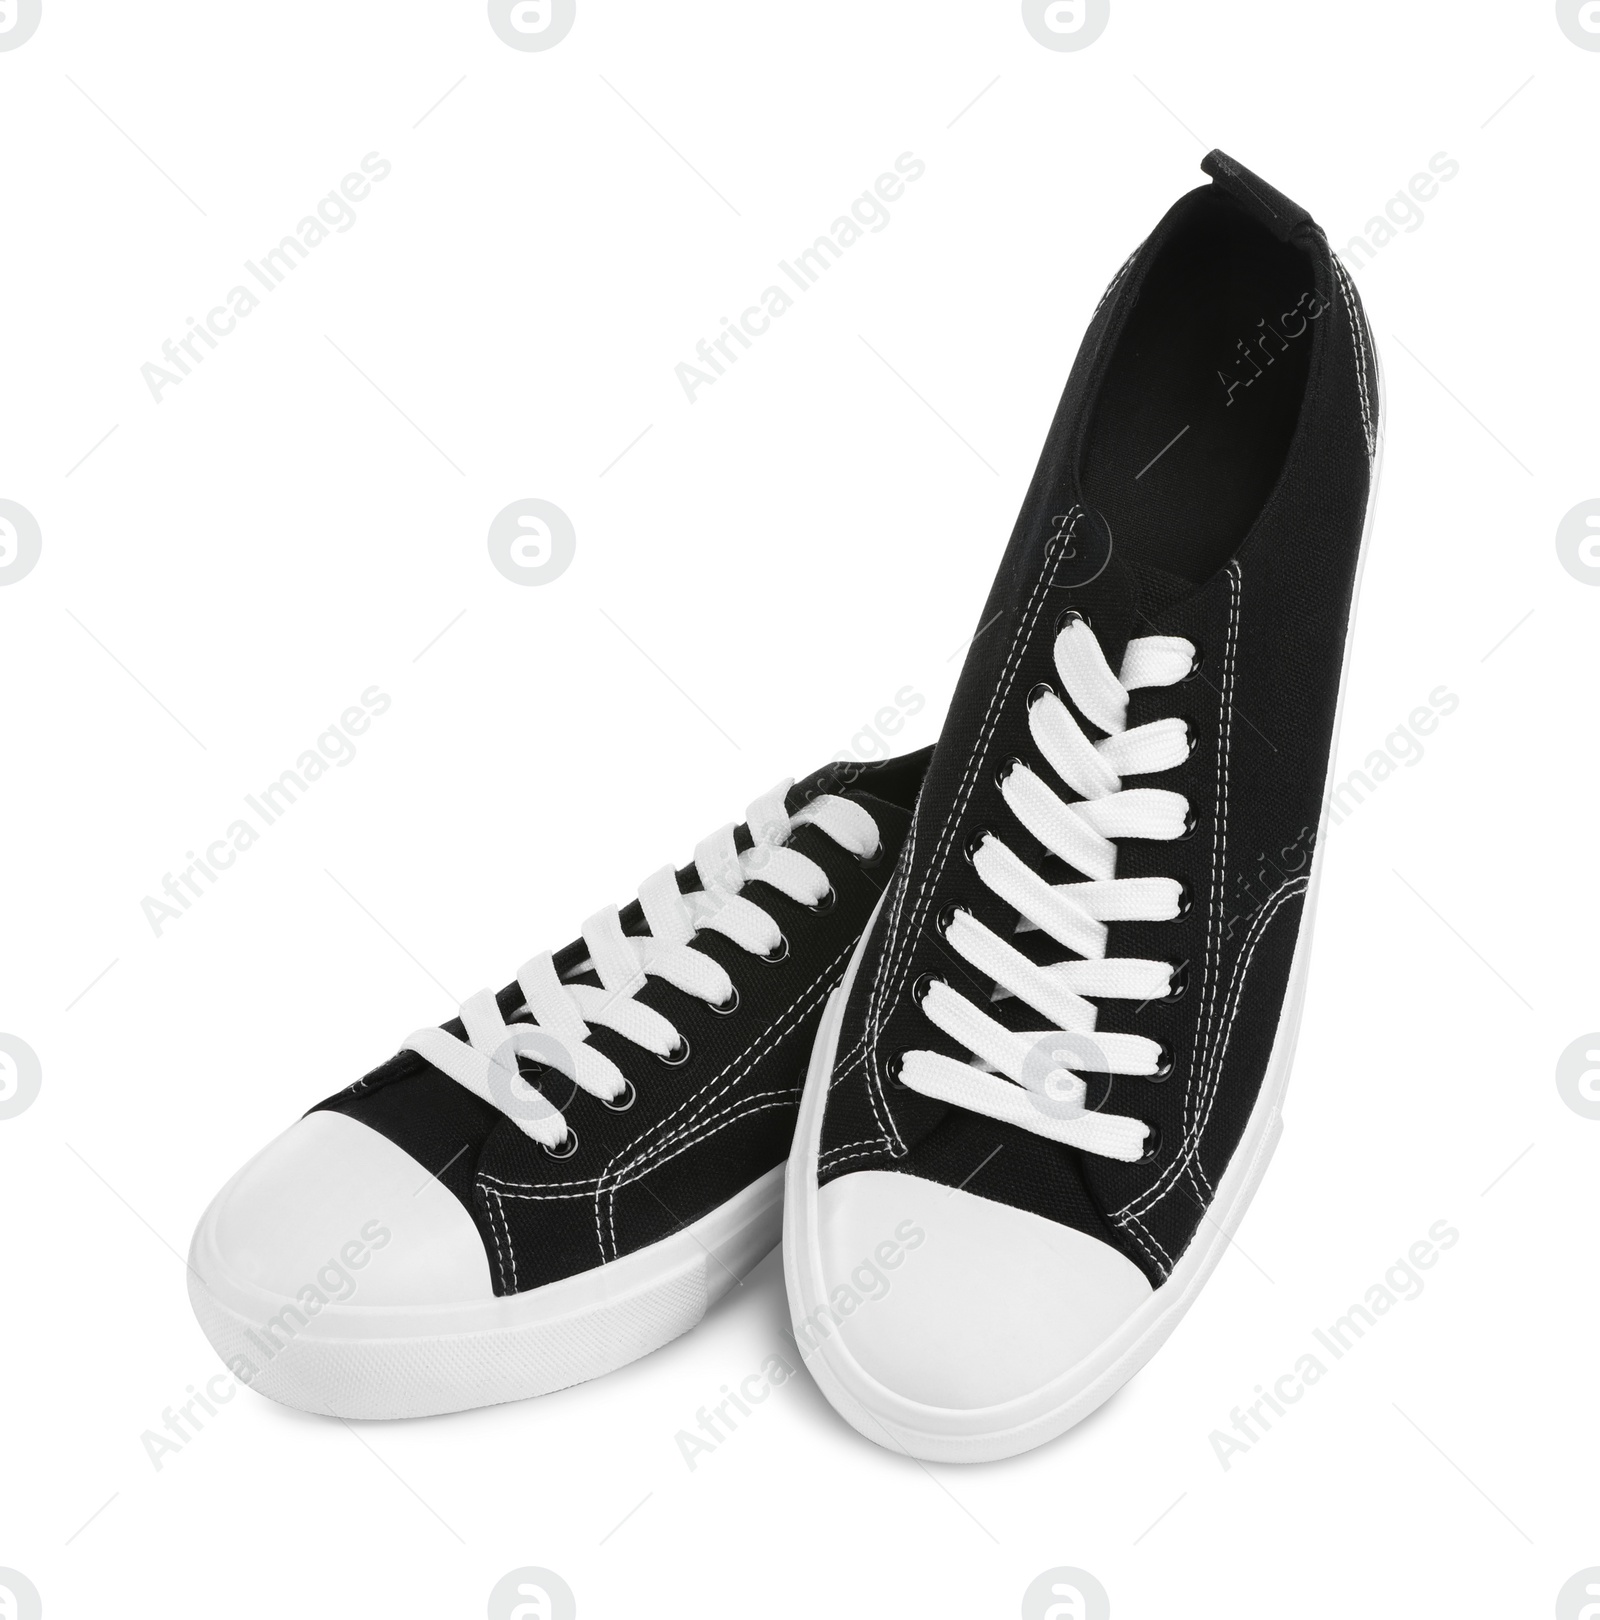 Photo of Pair of black classic old school sneakers isolated on white